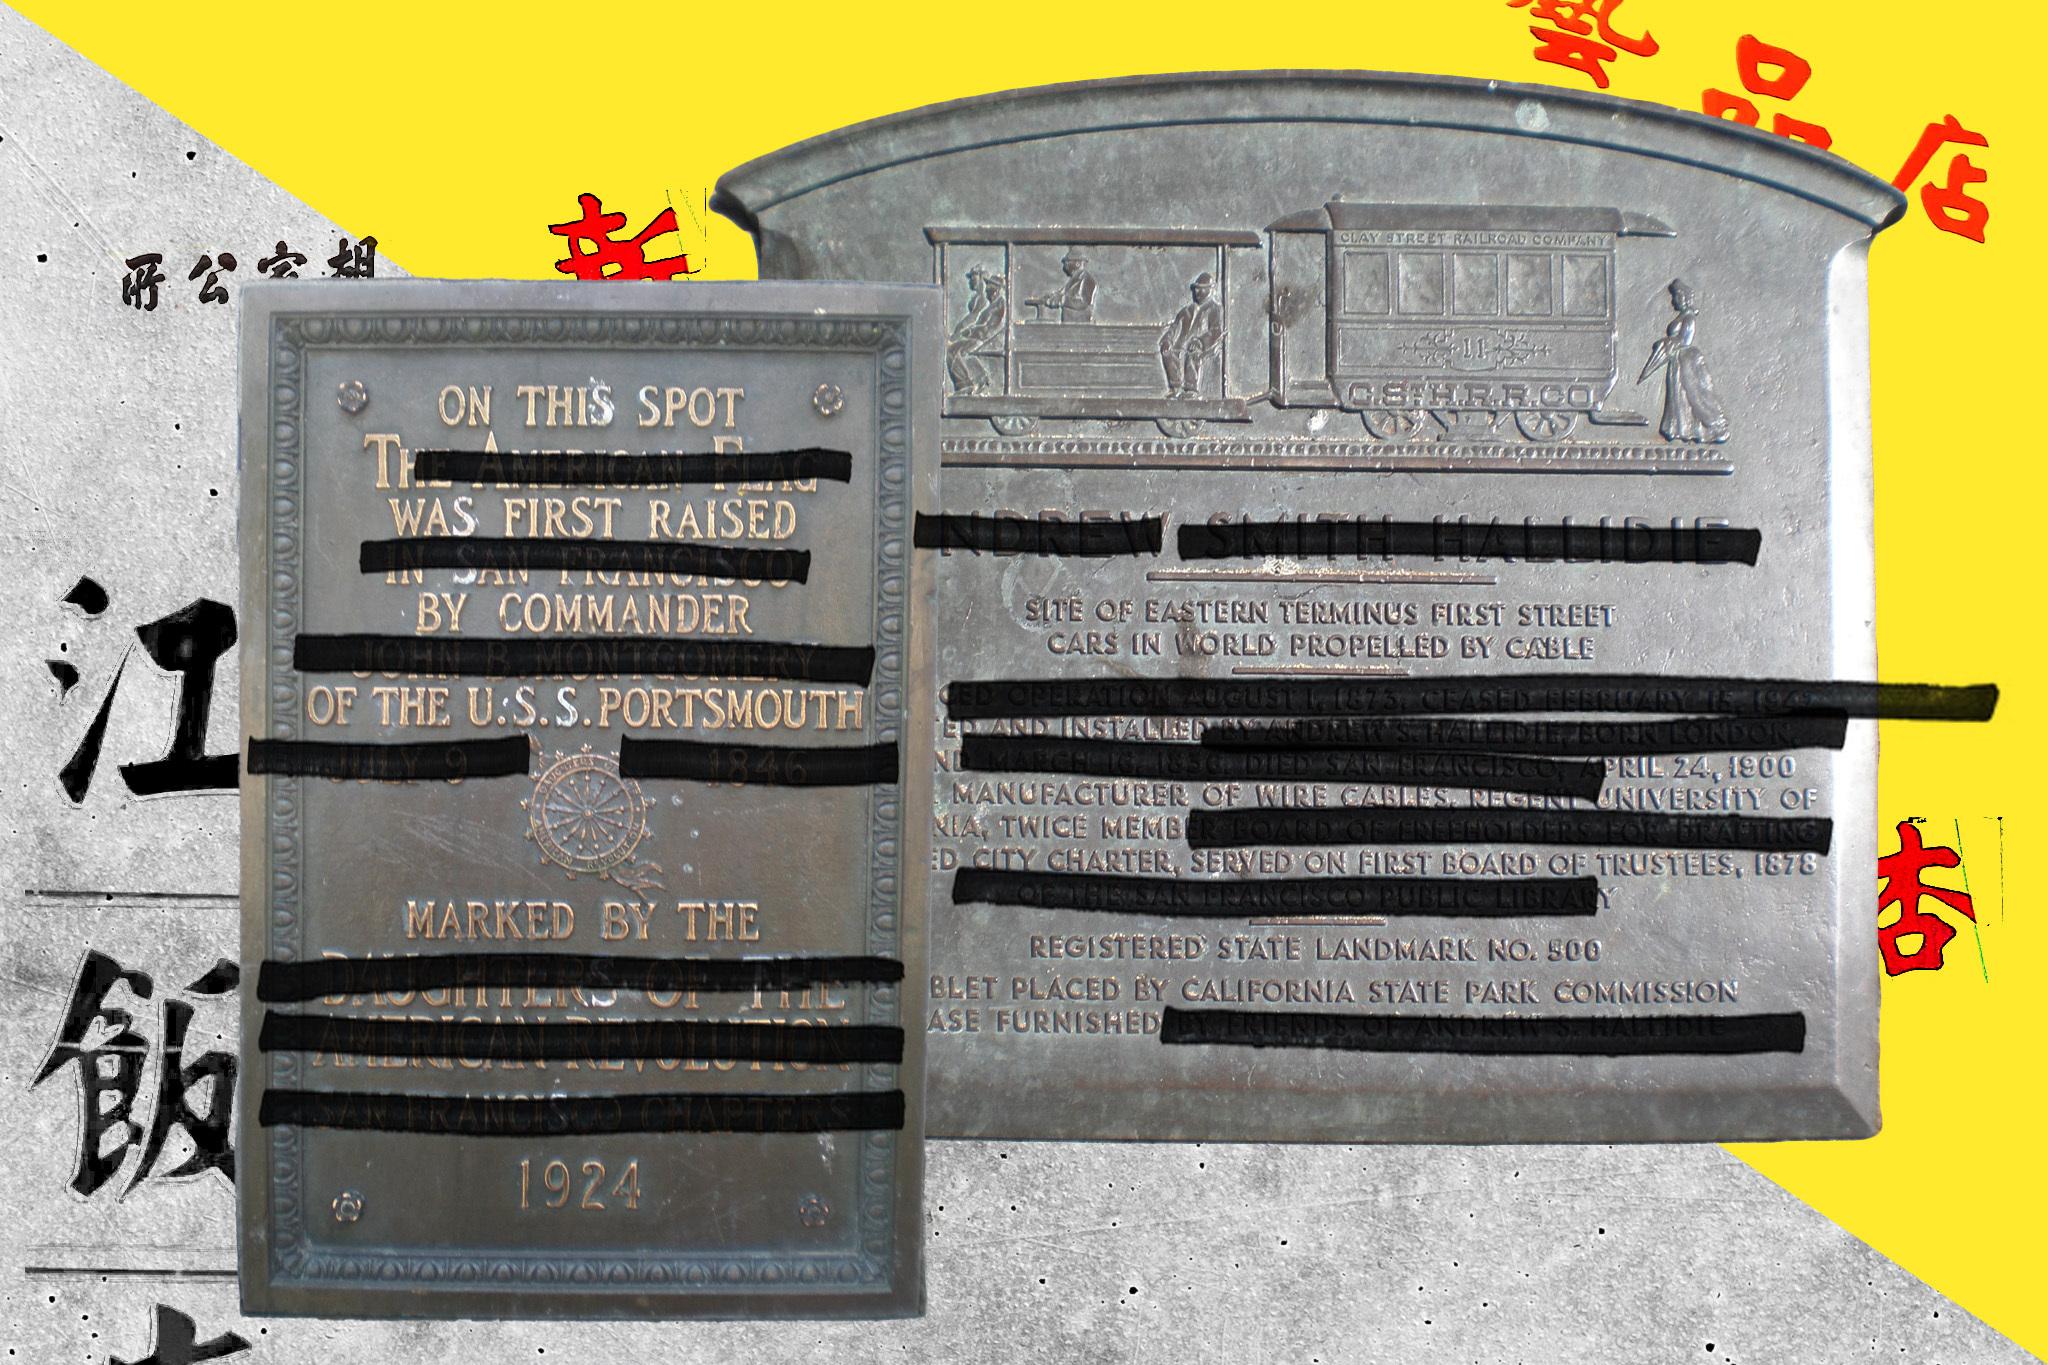 A historical plaque with raised text and a relief of a cable car, mounted on a concrete wall with yellow and black fragments and Chinese characters.